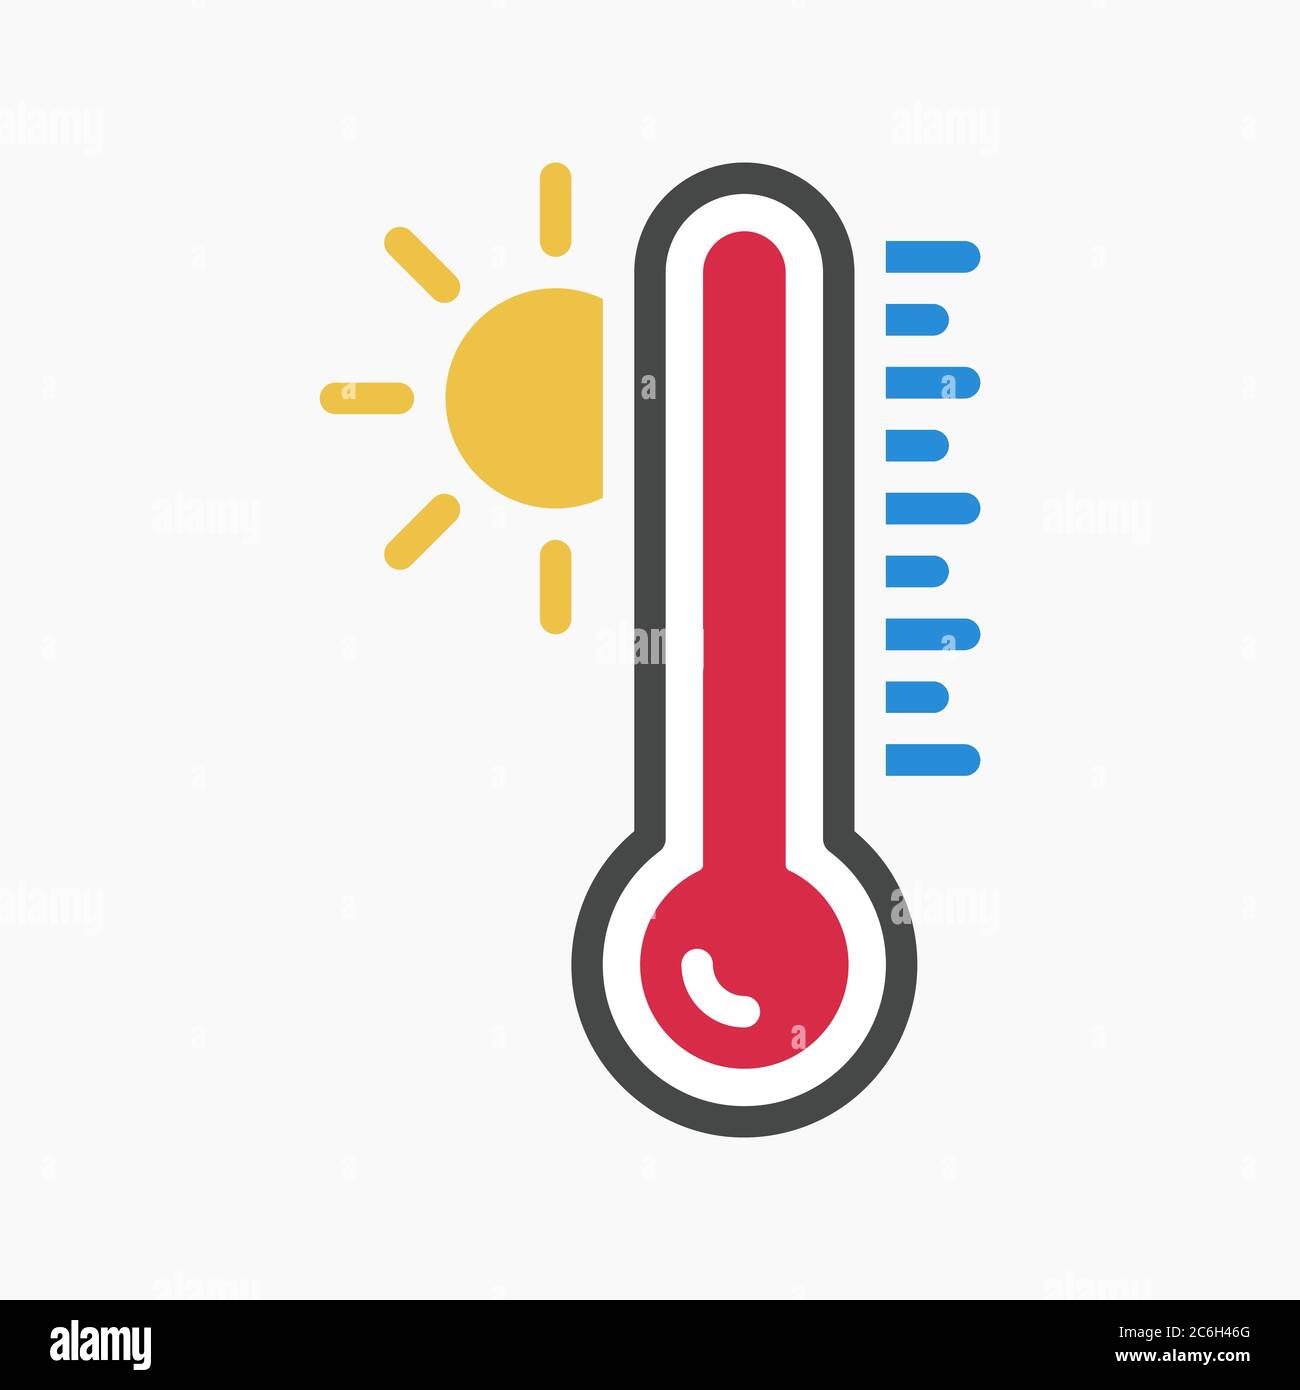 https://c8.alamy.com/comp/2C6H46G/hot-temperature-icon-vector-thermometer-symbol-isolated-for-any-purposes-2C6H46G.jpg